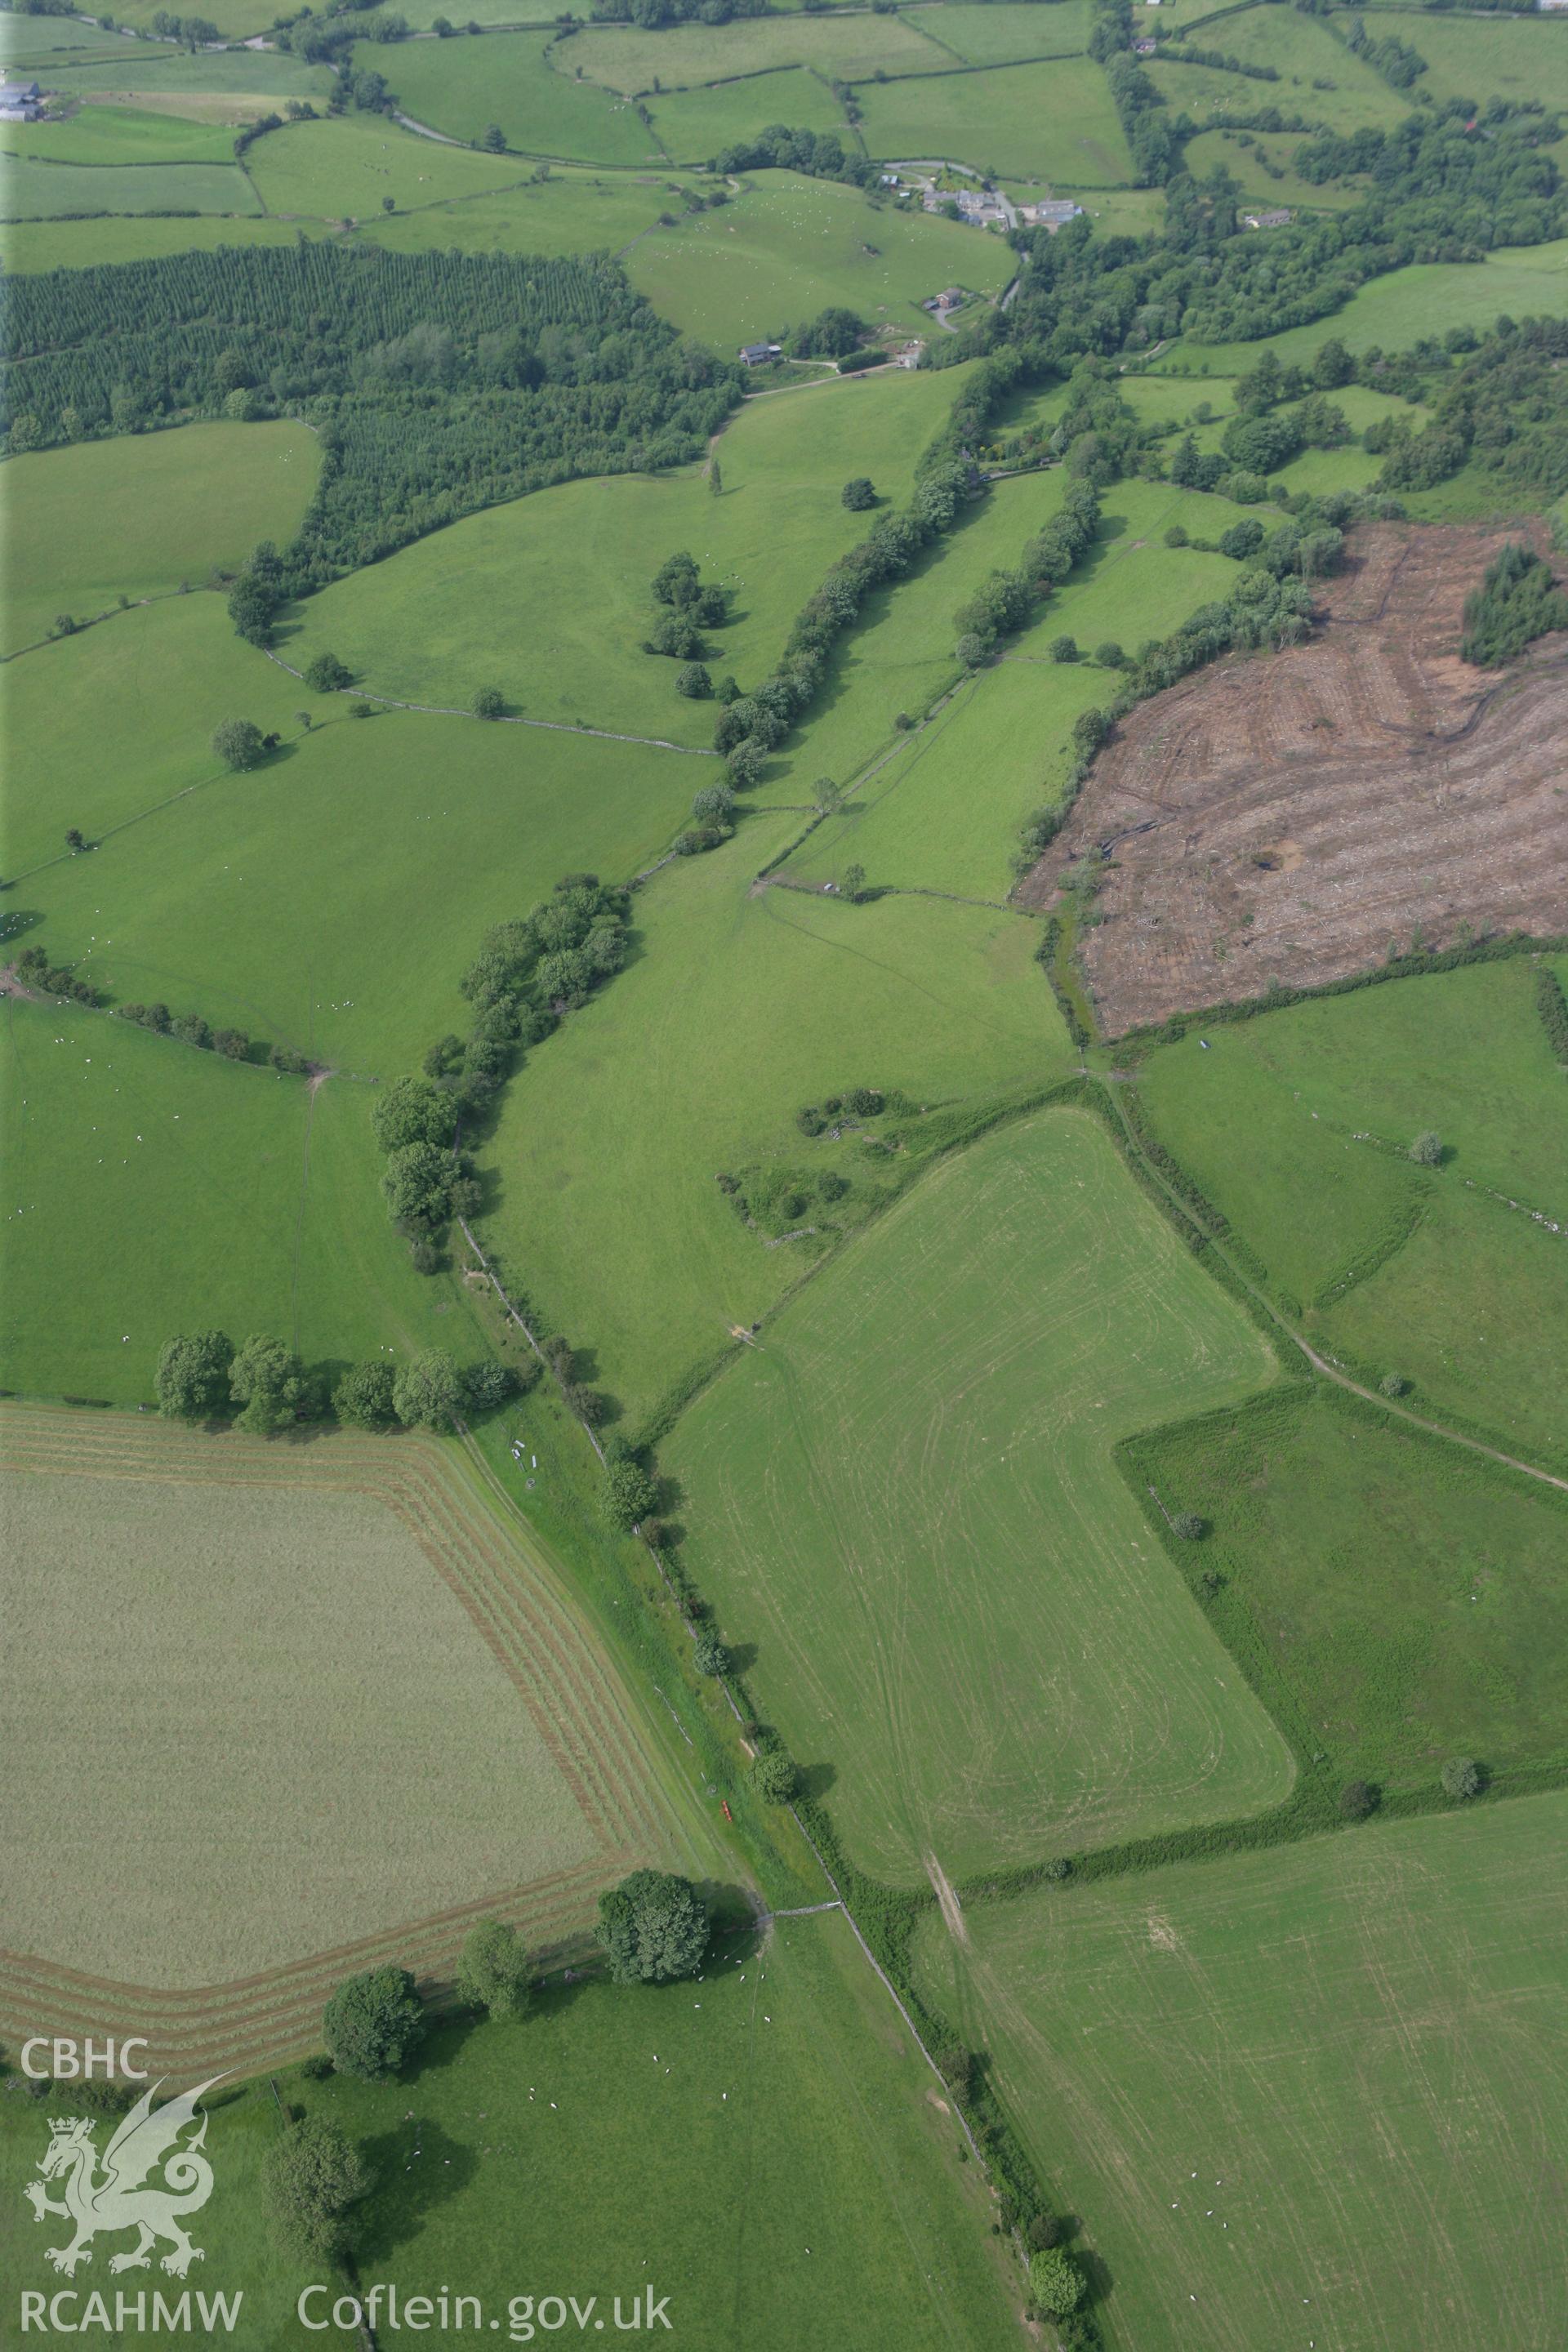 RCAHMW colour oblique photograph of Offa's Dyke, section from the footpath south of Pen-y-Bryn to Orseddwen. Taken by Toby Driver on 01/07/2008.